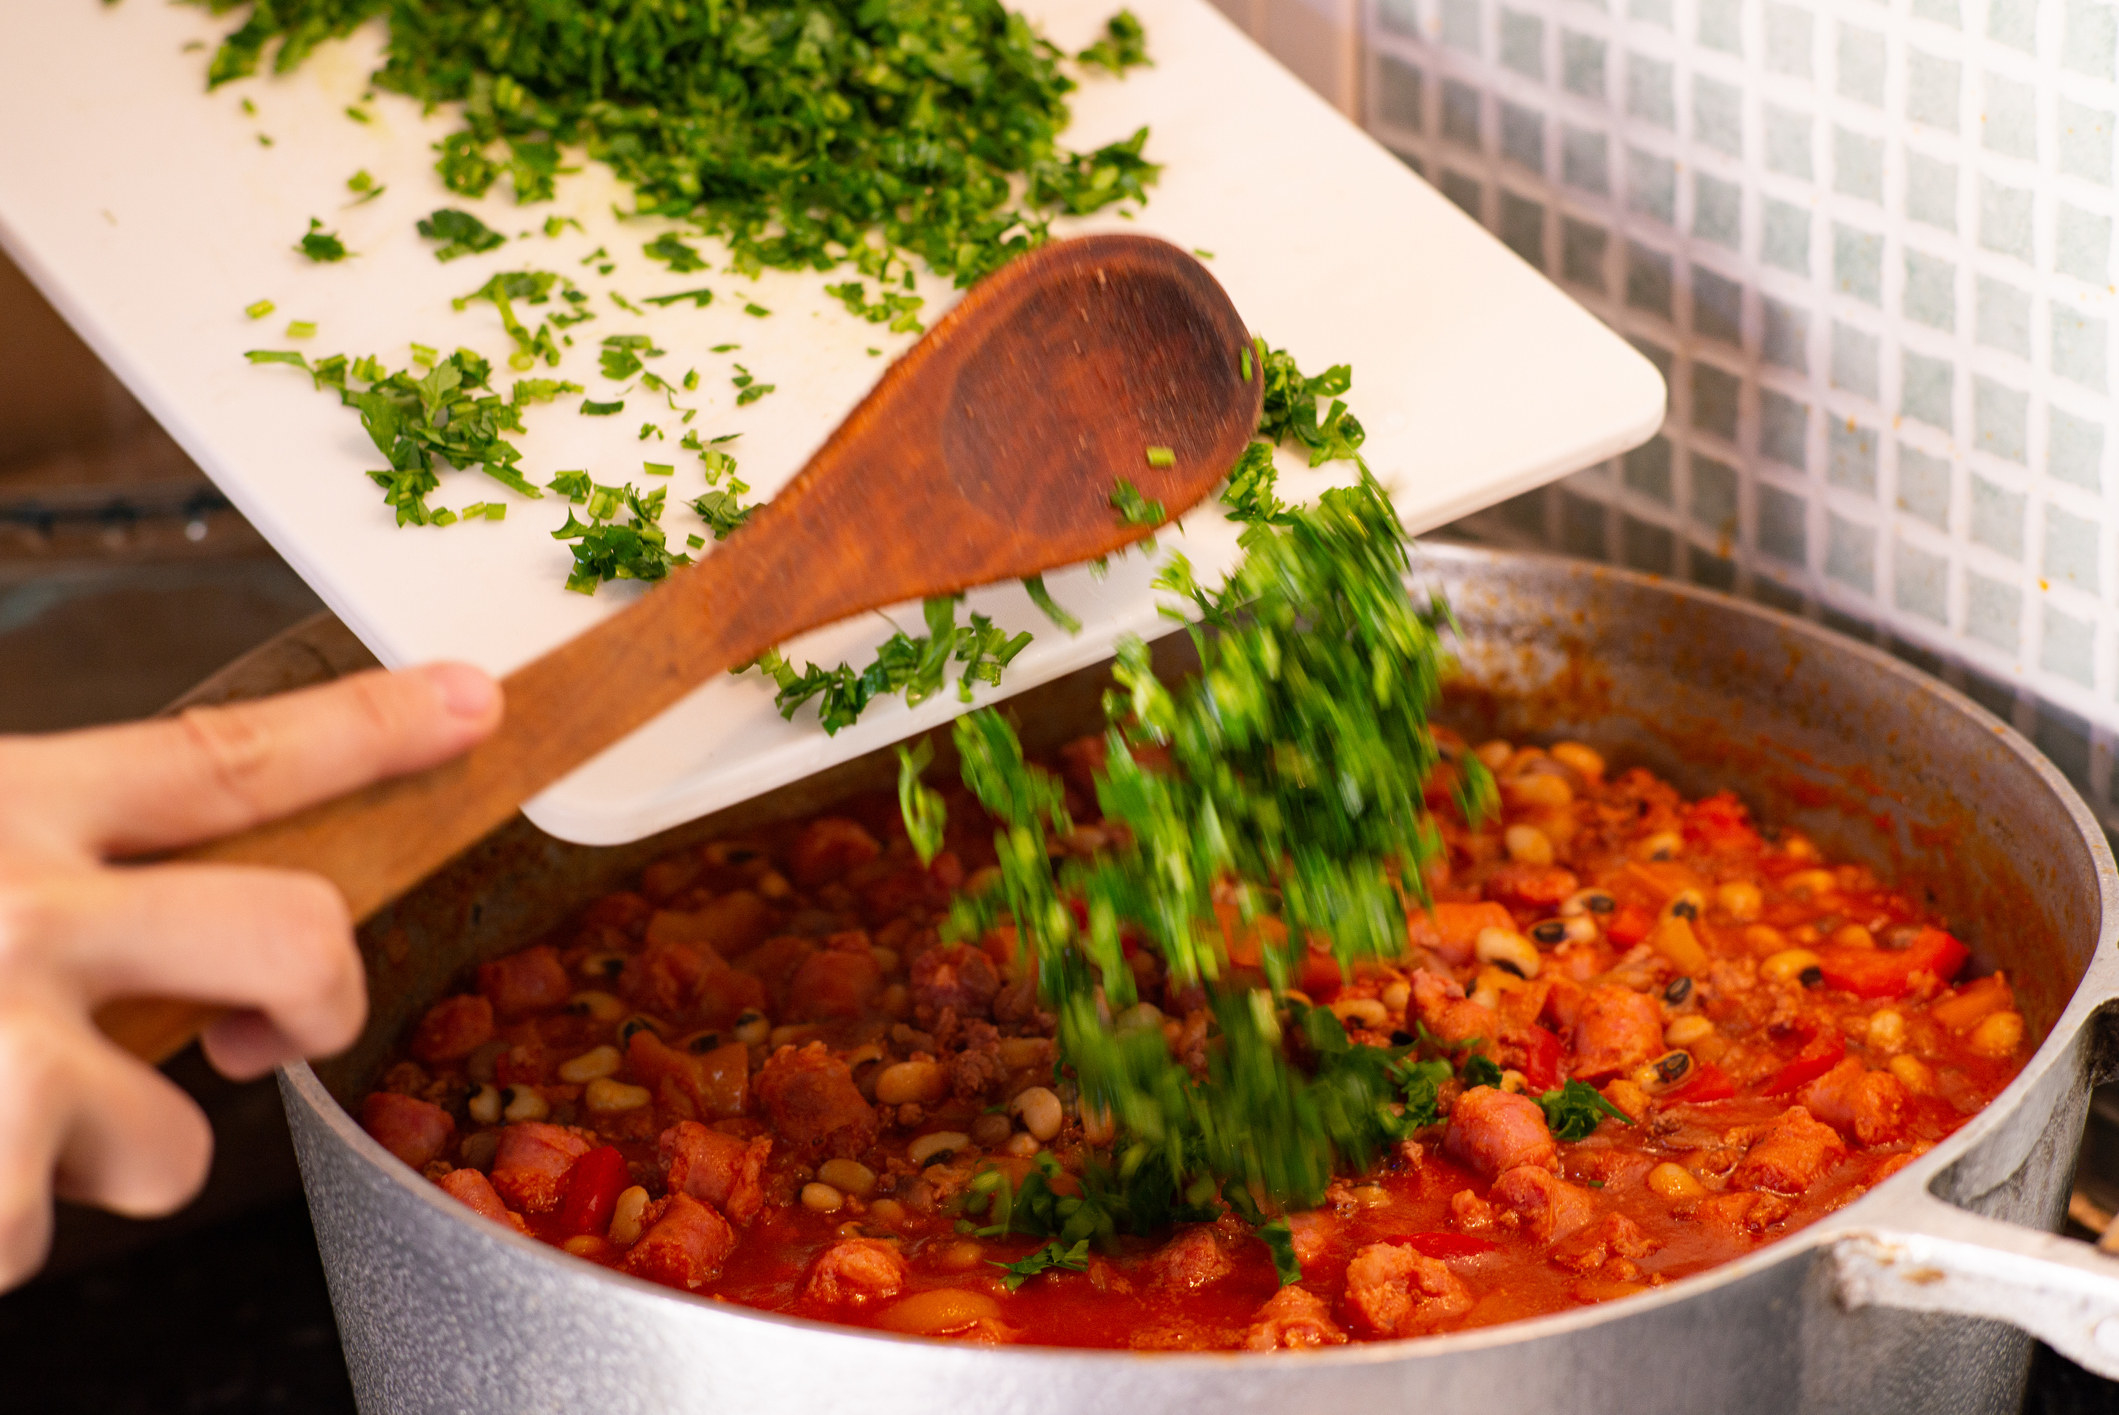 Putting fresh herbs into a pot of chili.